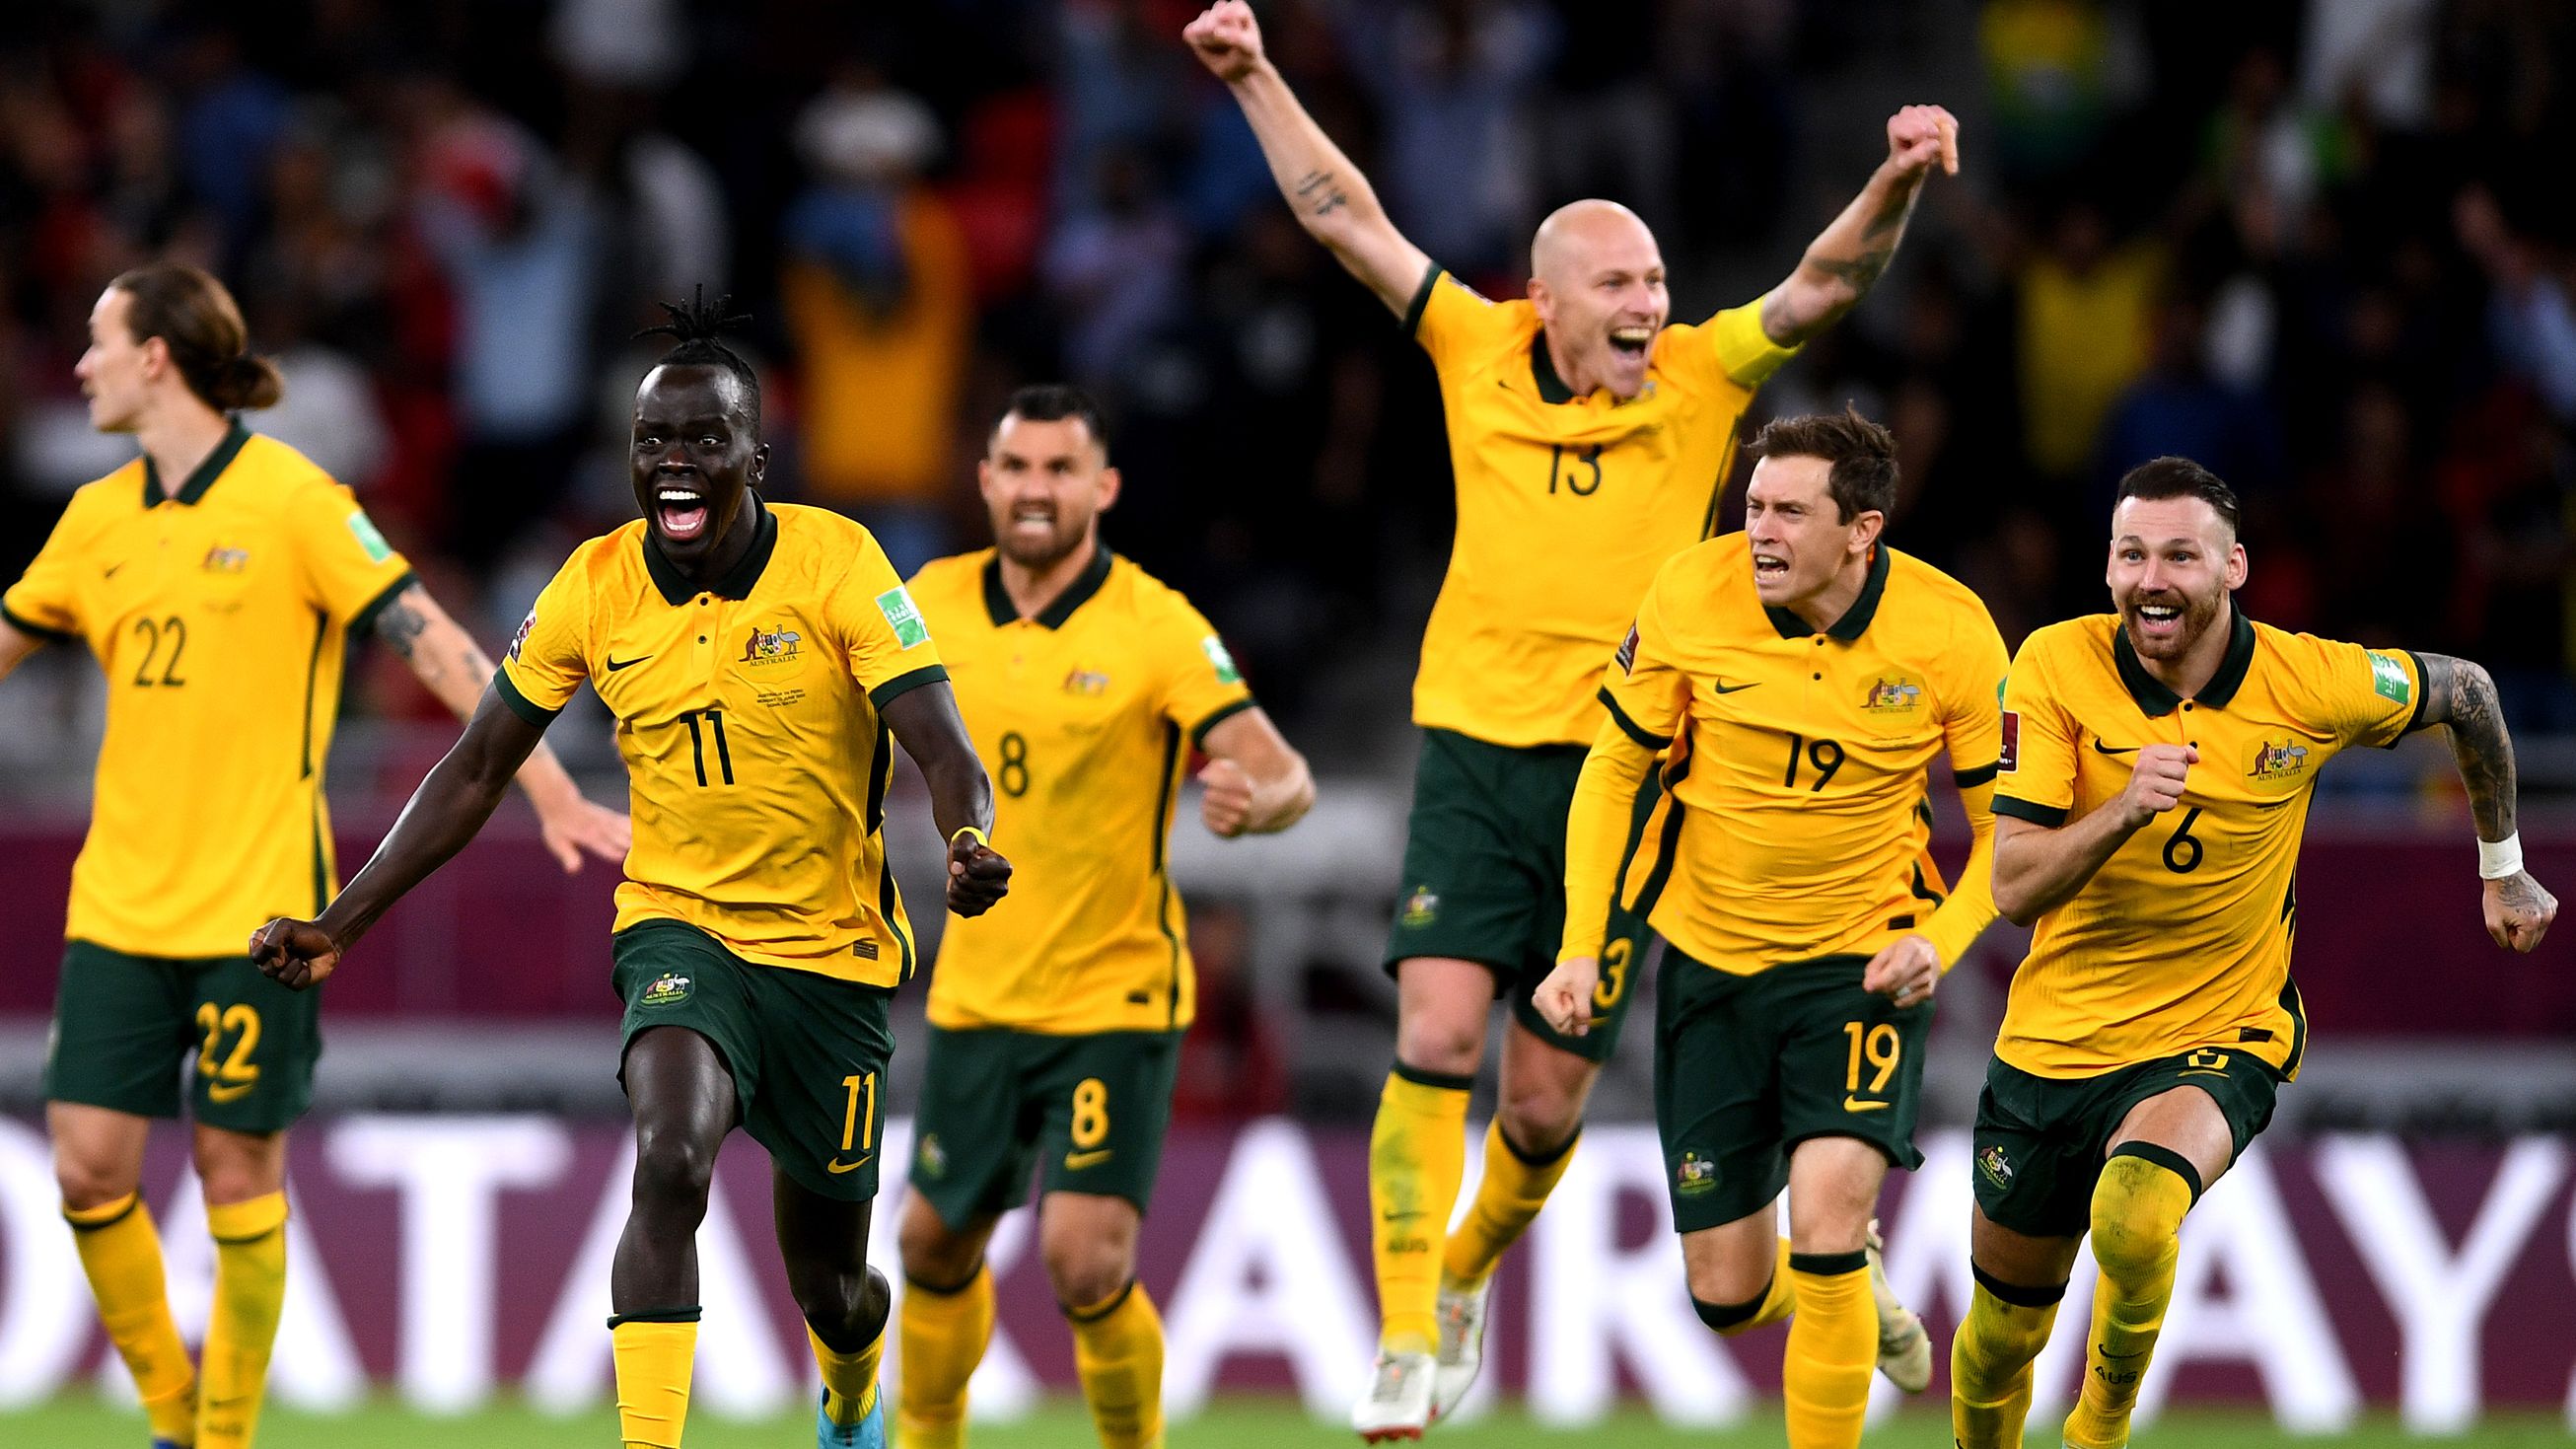 The Socceroos celebrate after defeating Peru in the 2022 FIFA World Cup playoff match at Ahmad Bin Ali Stadium.